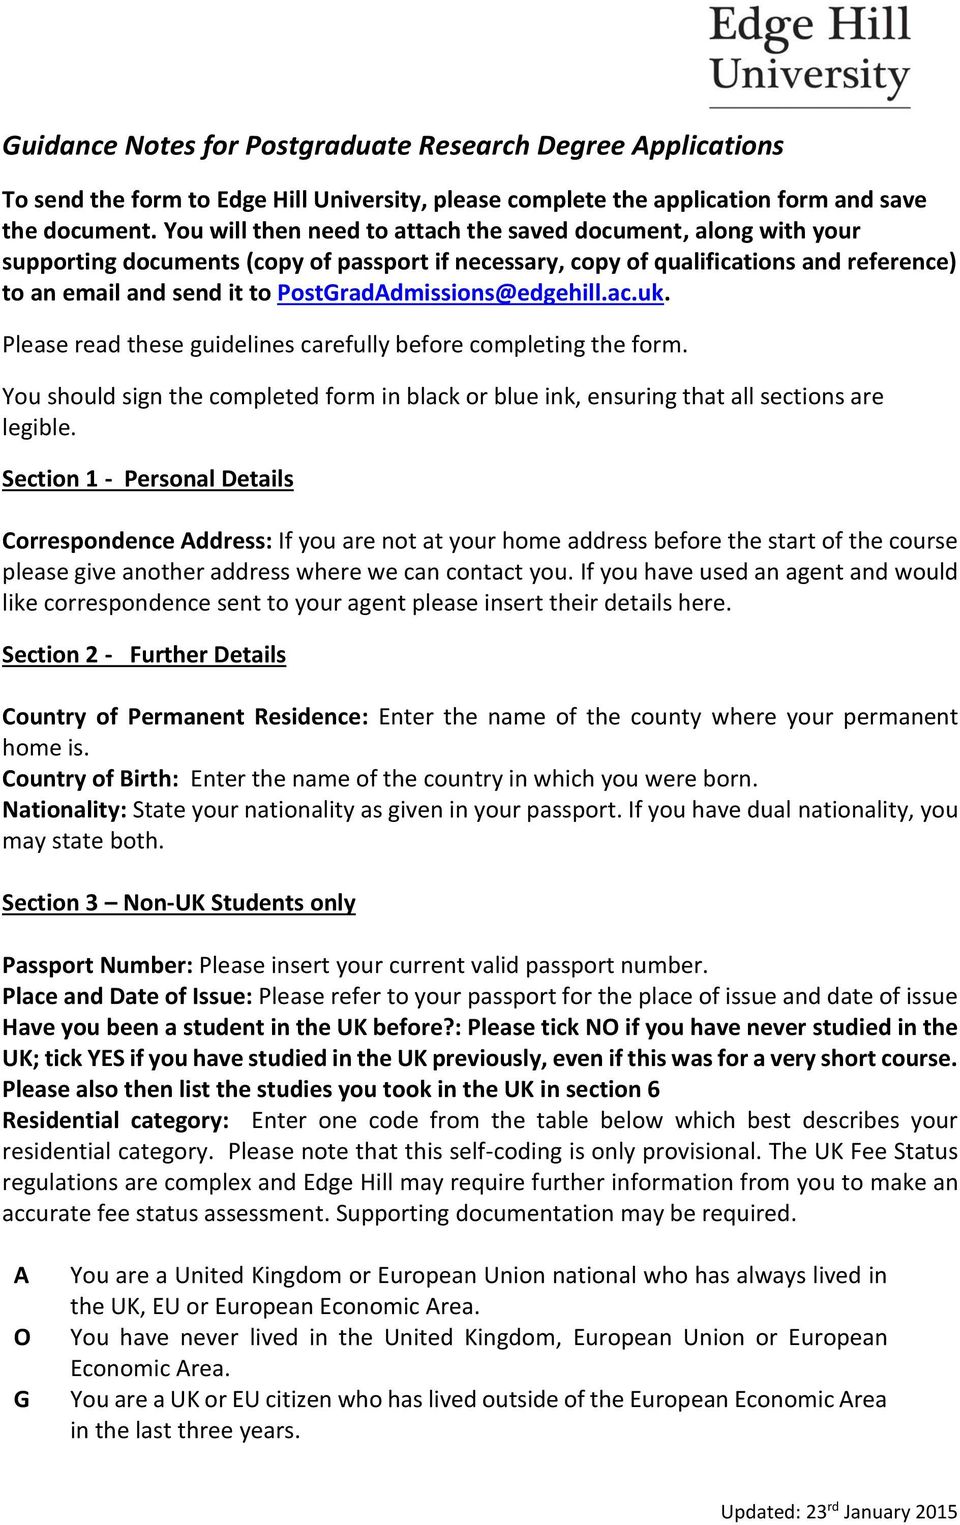 PostGradAdmissions@edgehill.ac.uk. Please read these guidelines carefully before completing the form. You should sign the completed form in black or blue ink, ensuring that all sections are legible.